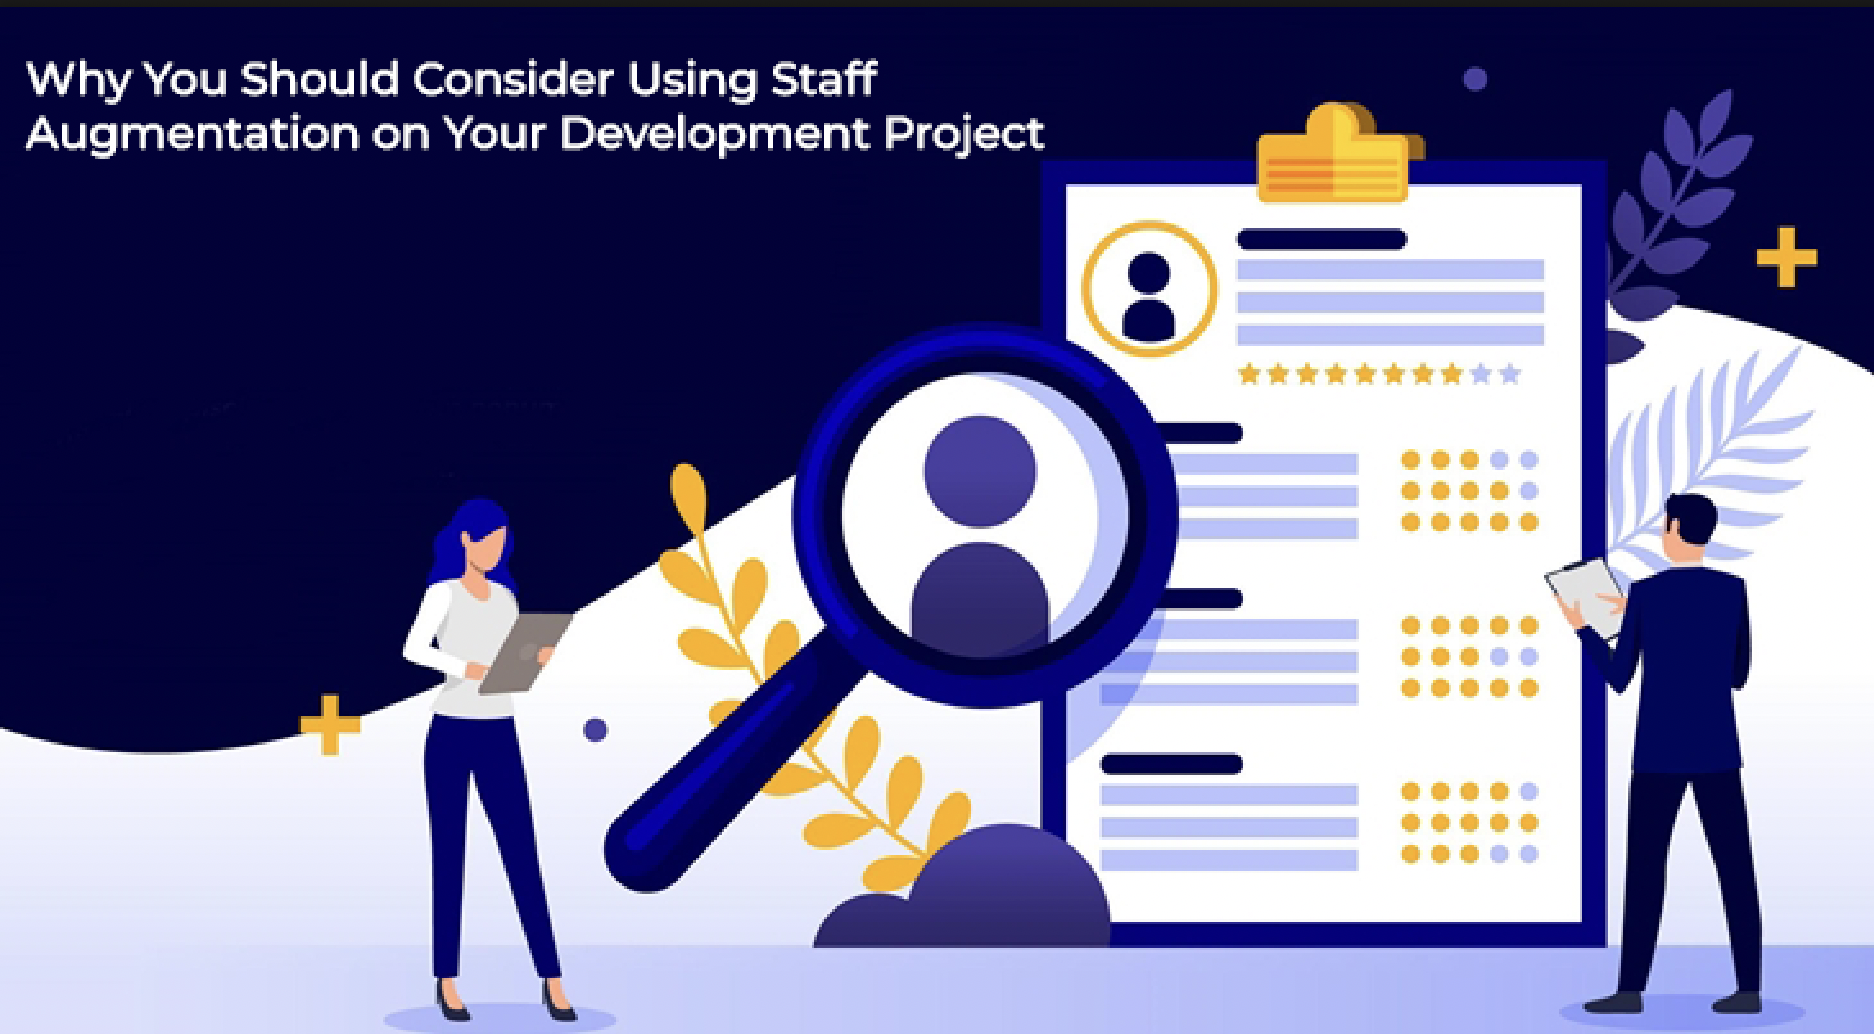 Why You Should Consider Using Staff Augmentation on Your Development Project